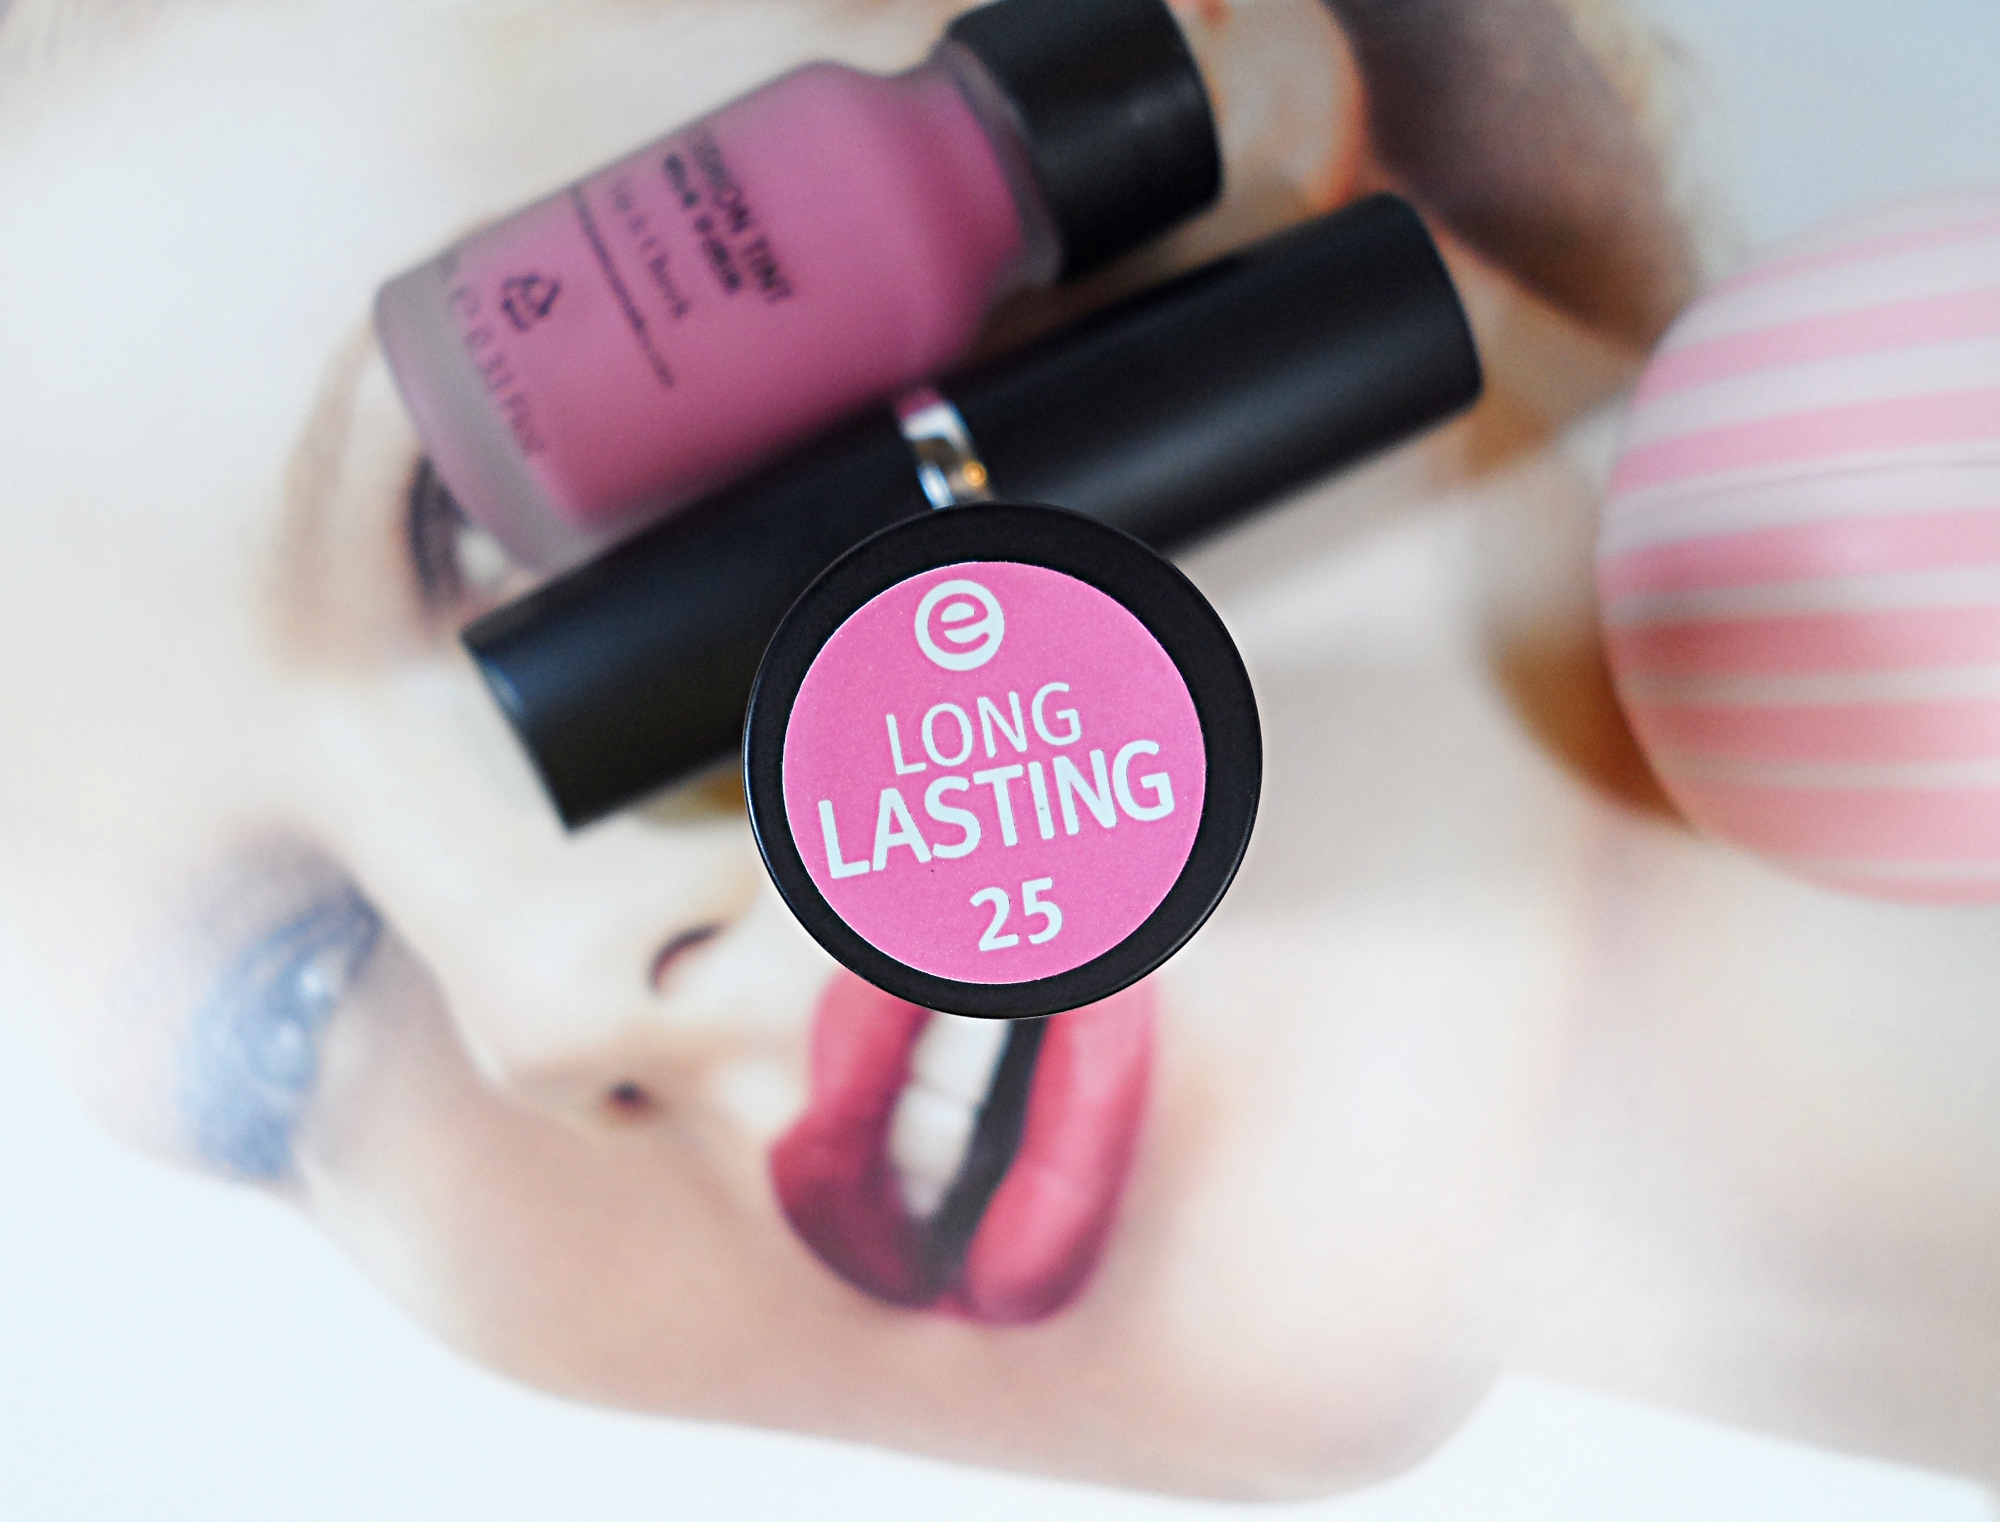 a pink lipstick by affordable brand essence lays on the opened magazine page